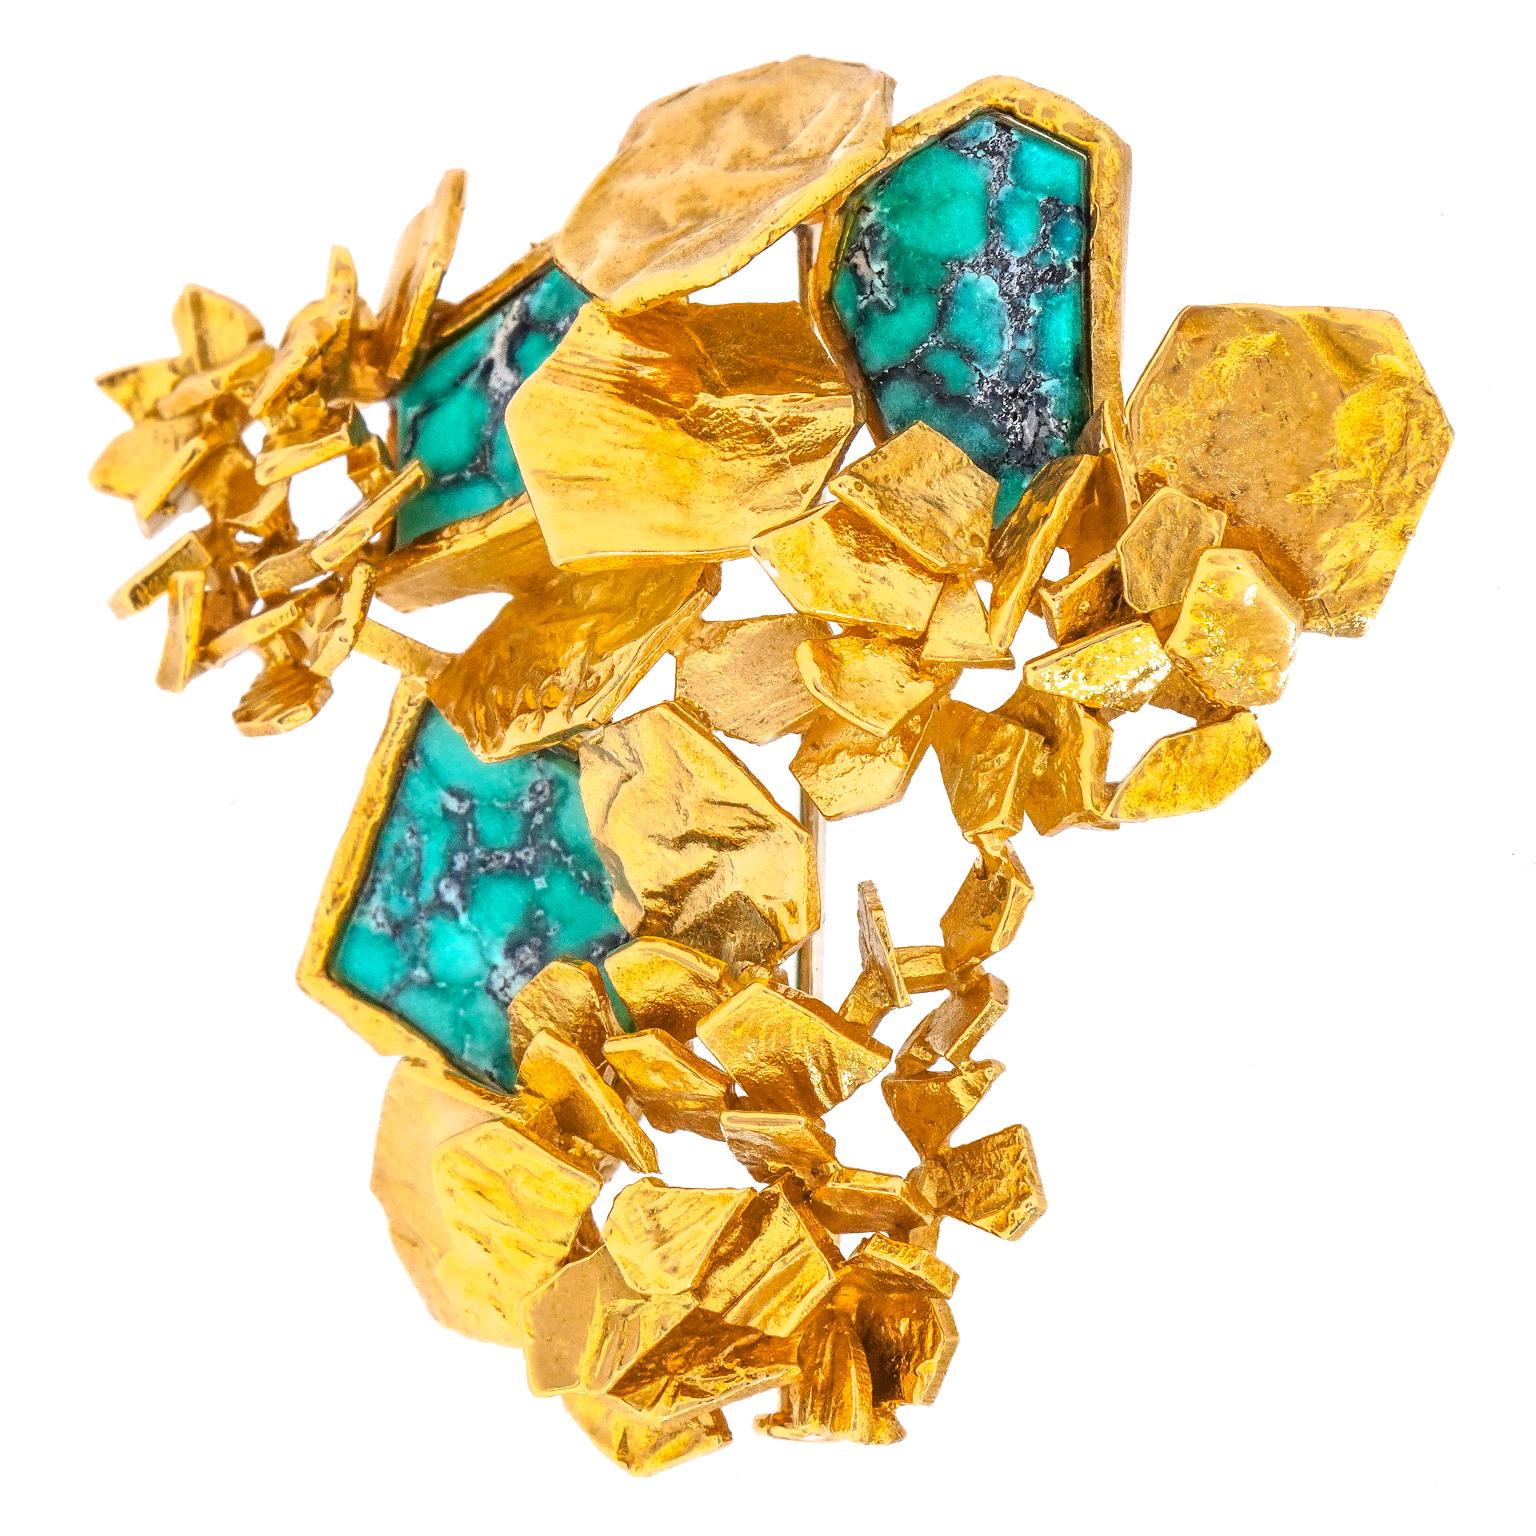 Swiss Modern Sixties Turquoise and Gold Brooch For Sale 4